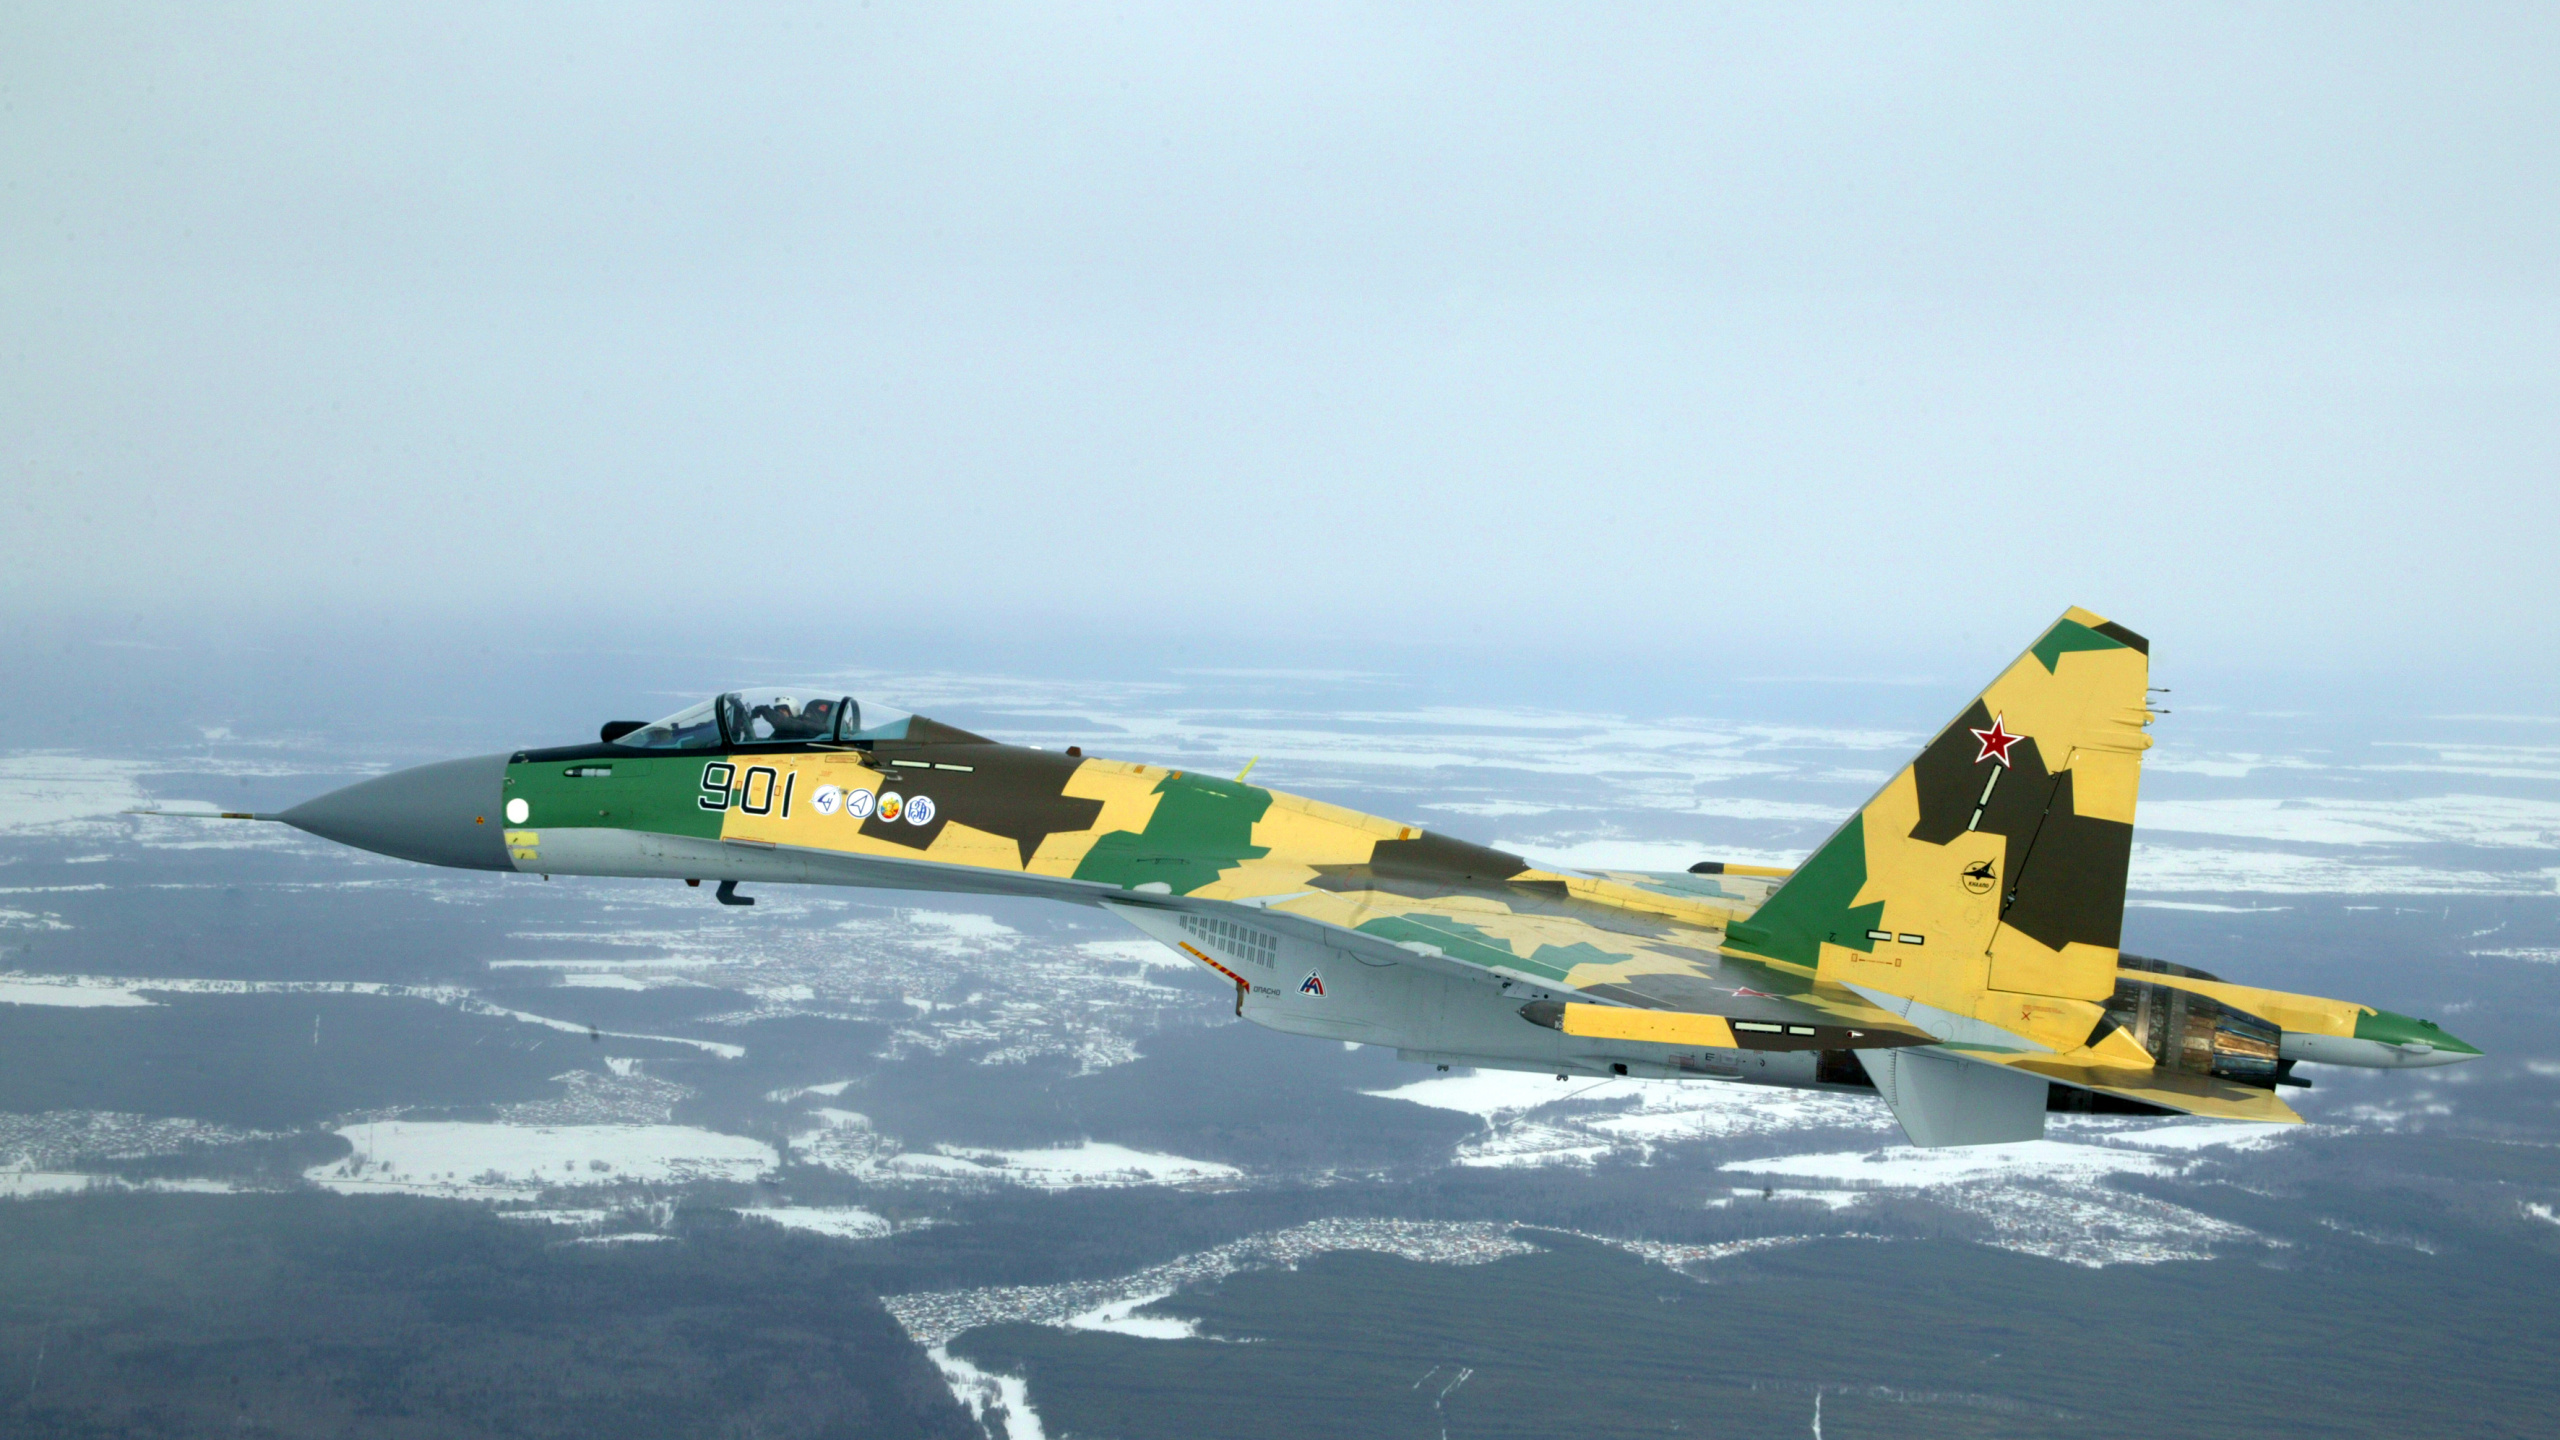 Green and Yellow Fighter Plane on Mid Air During Daytime. Wallpaper in 2560x1440 Resolution